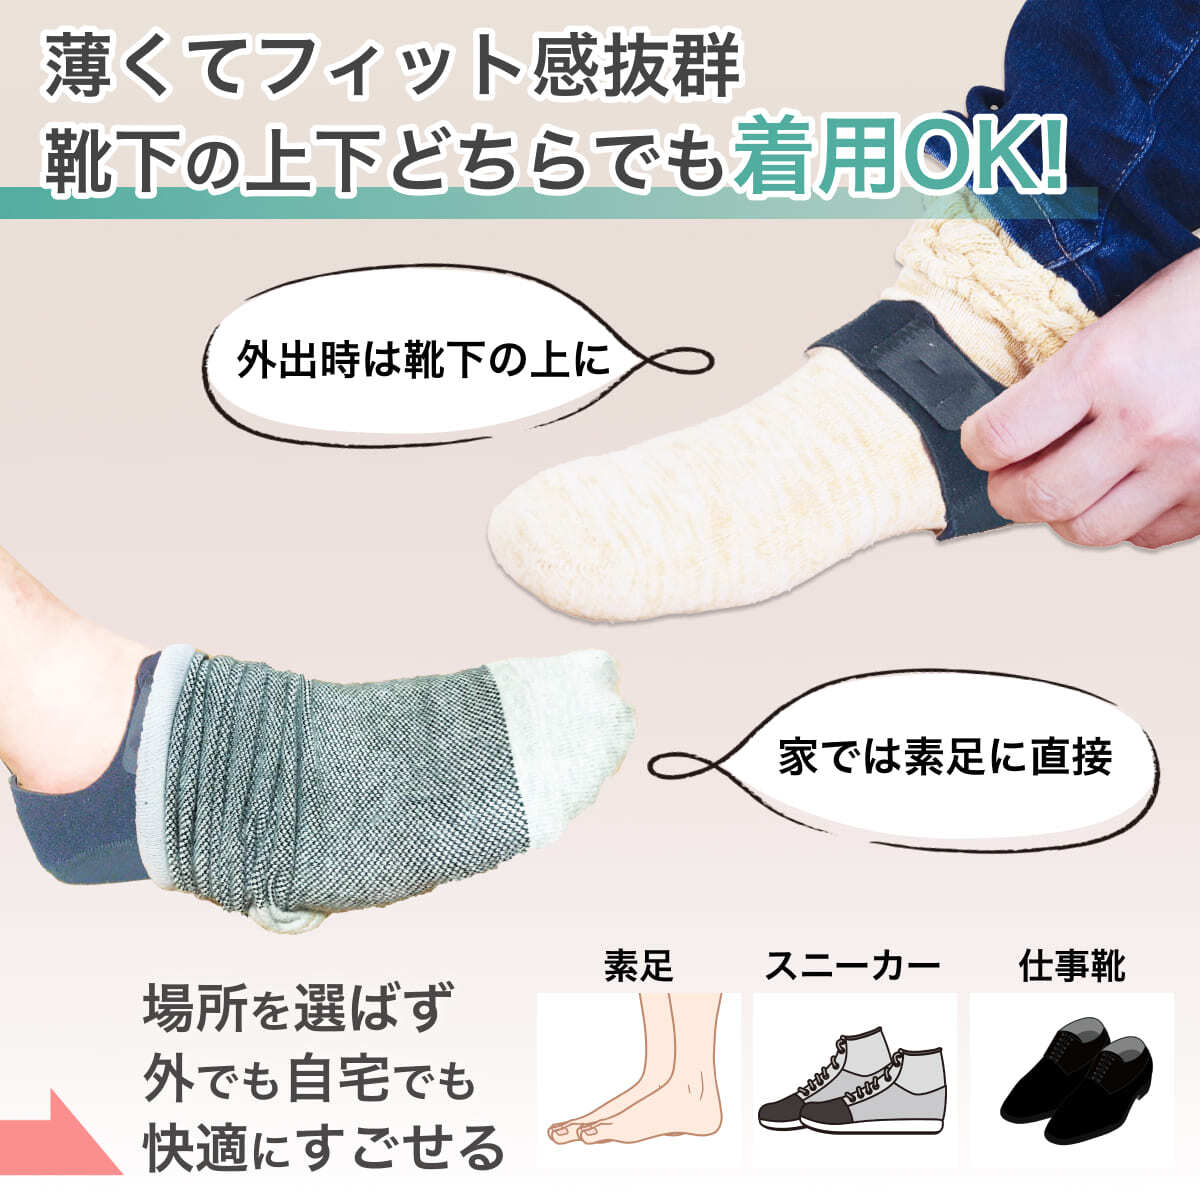  pair bottom ... supporter heel . impact absorption pair neck kendo recommendation pain measures goods both pair minute black L size 